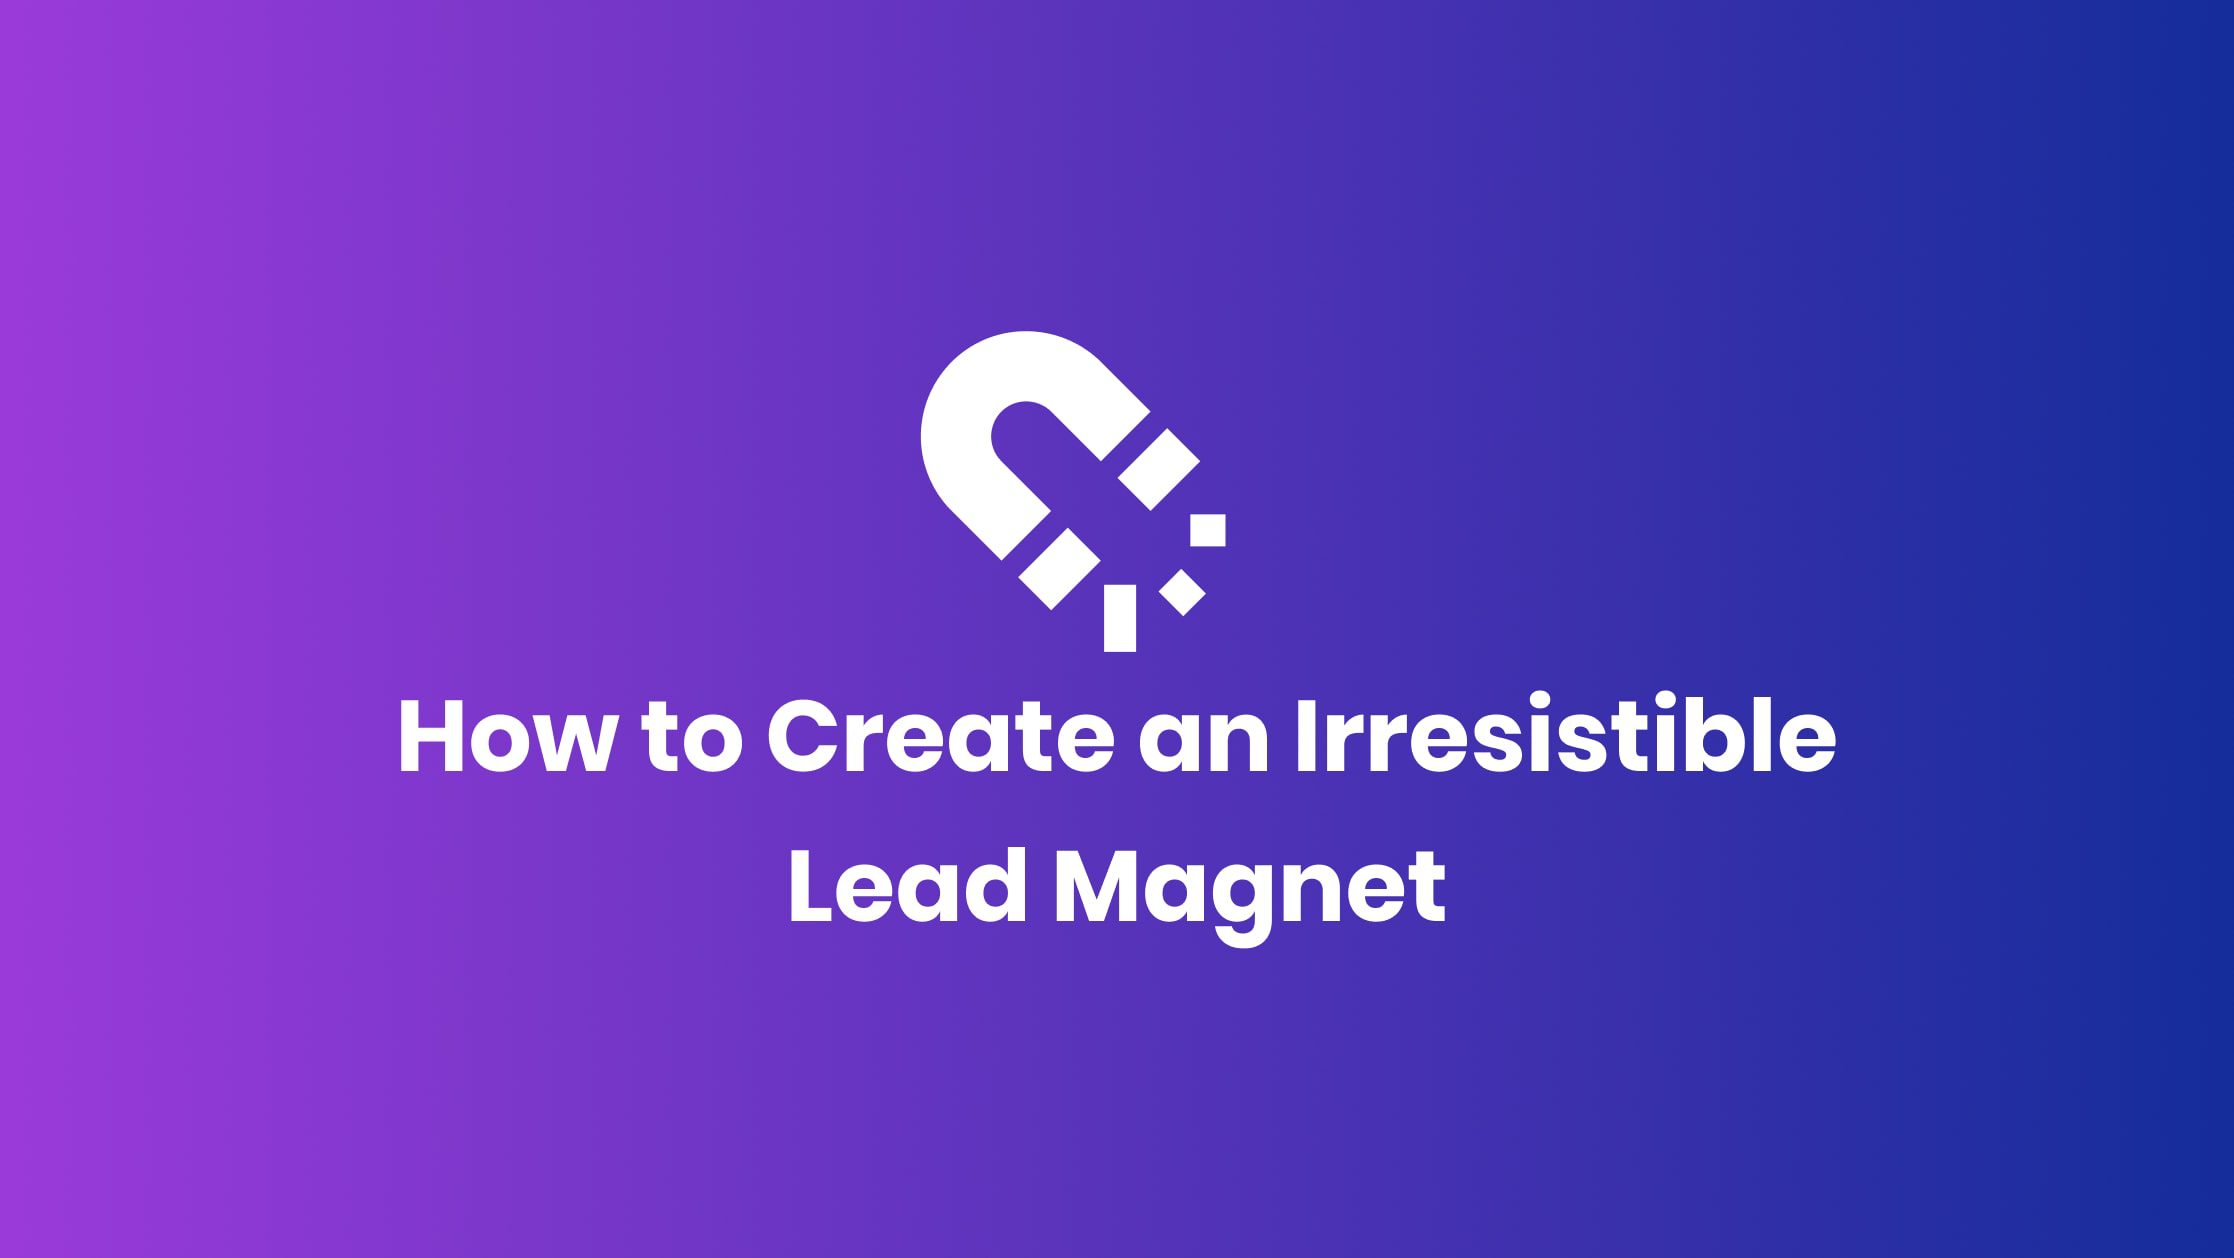 5 Steps to Create an Irresistible Lead Magnet